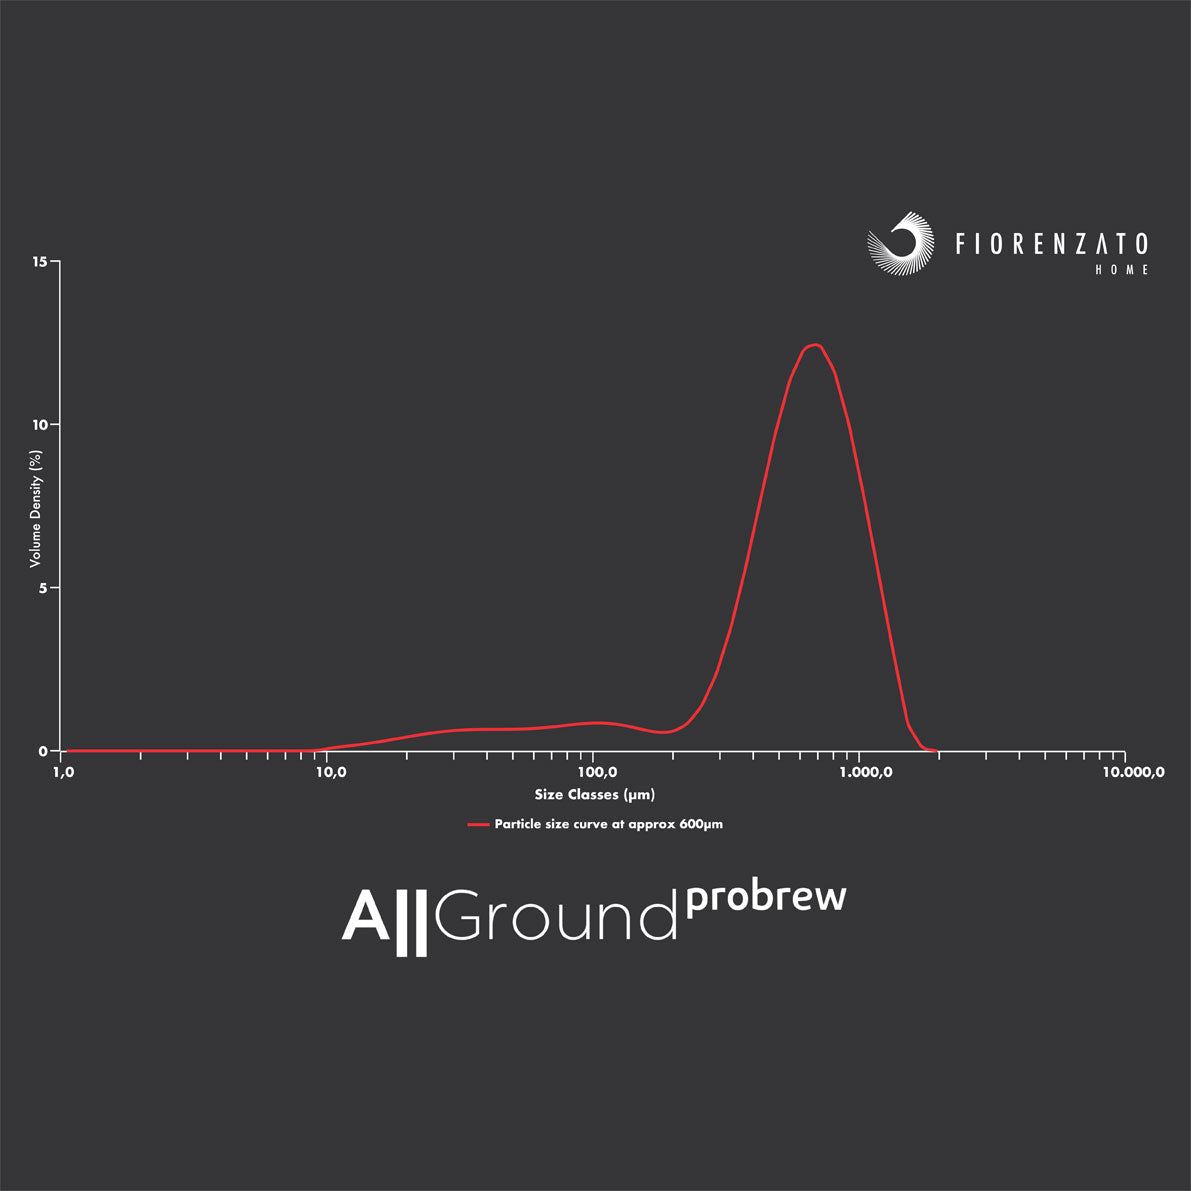 allground probrew particle grind size curve chart